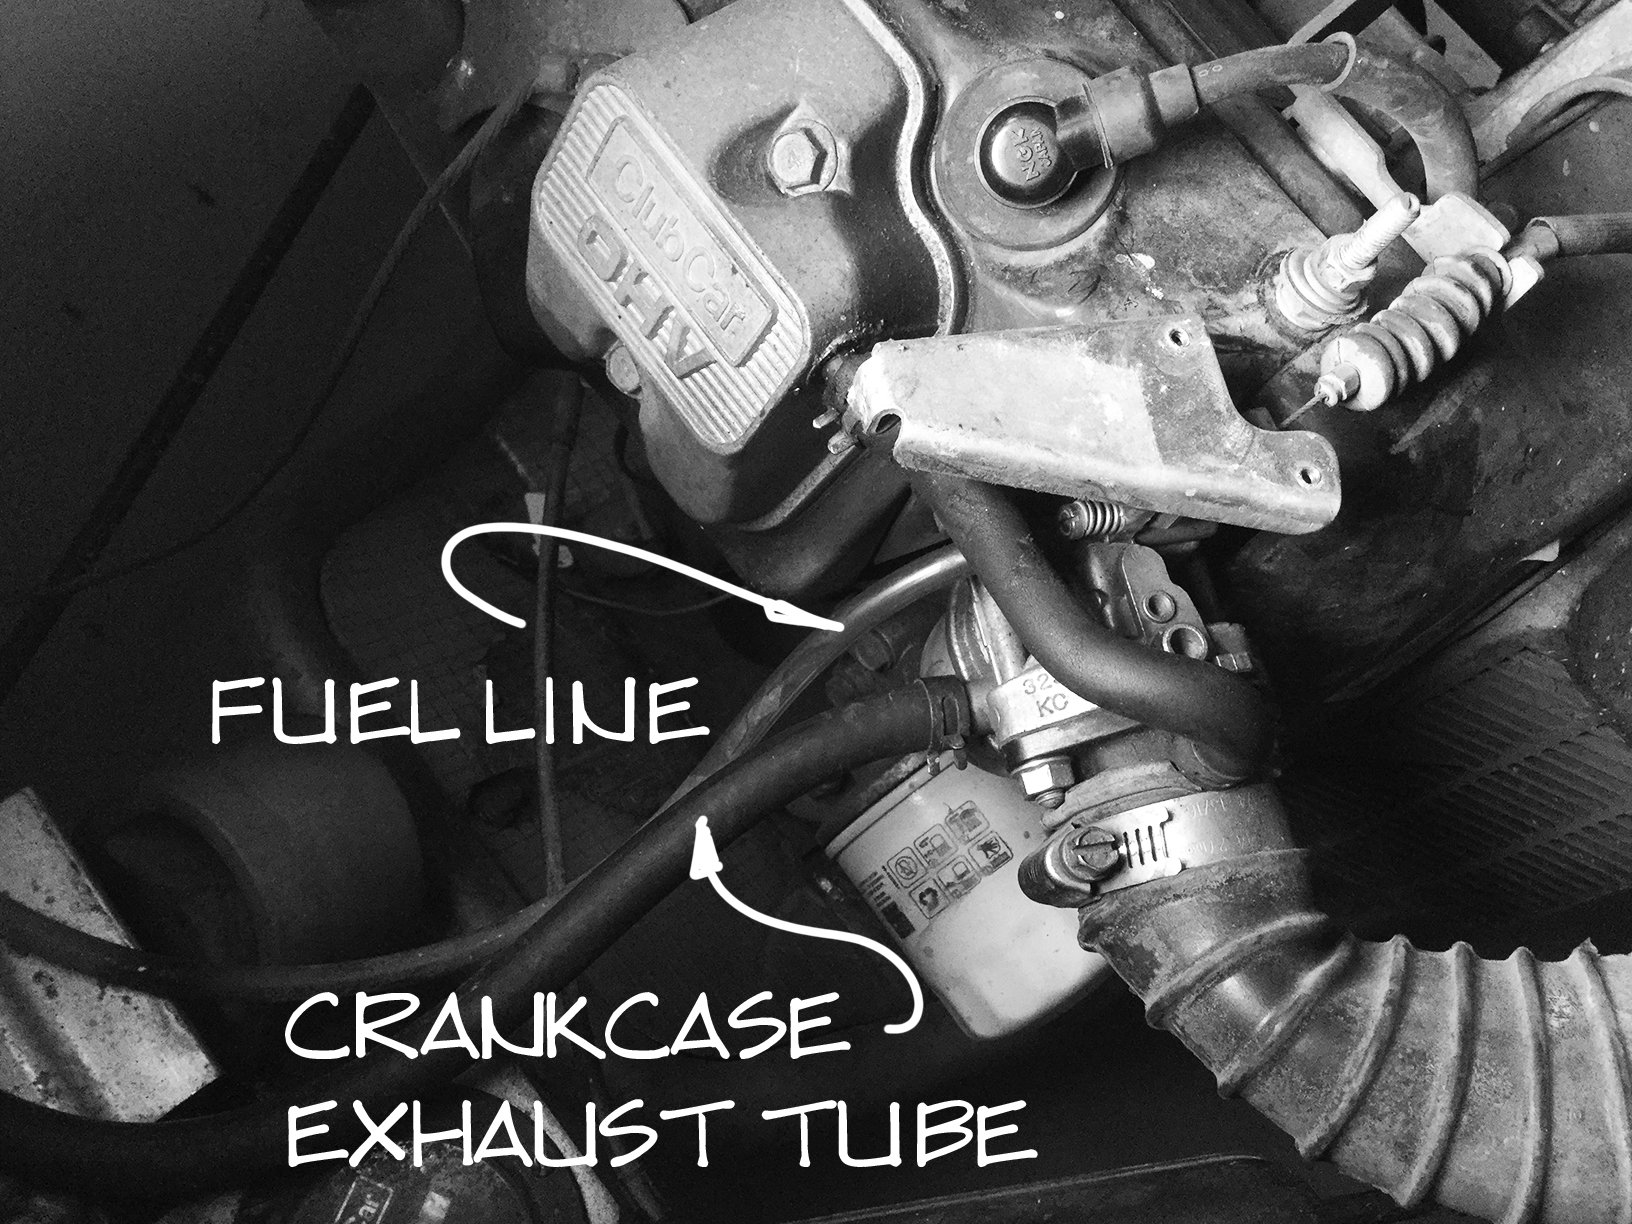 Club Car Fuel Line and Crankcase Exhaust Tube – Golf Cart Tips